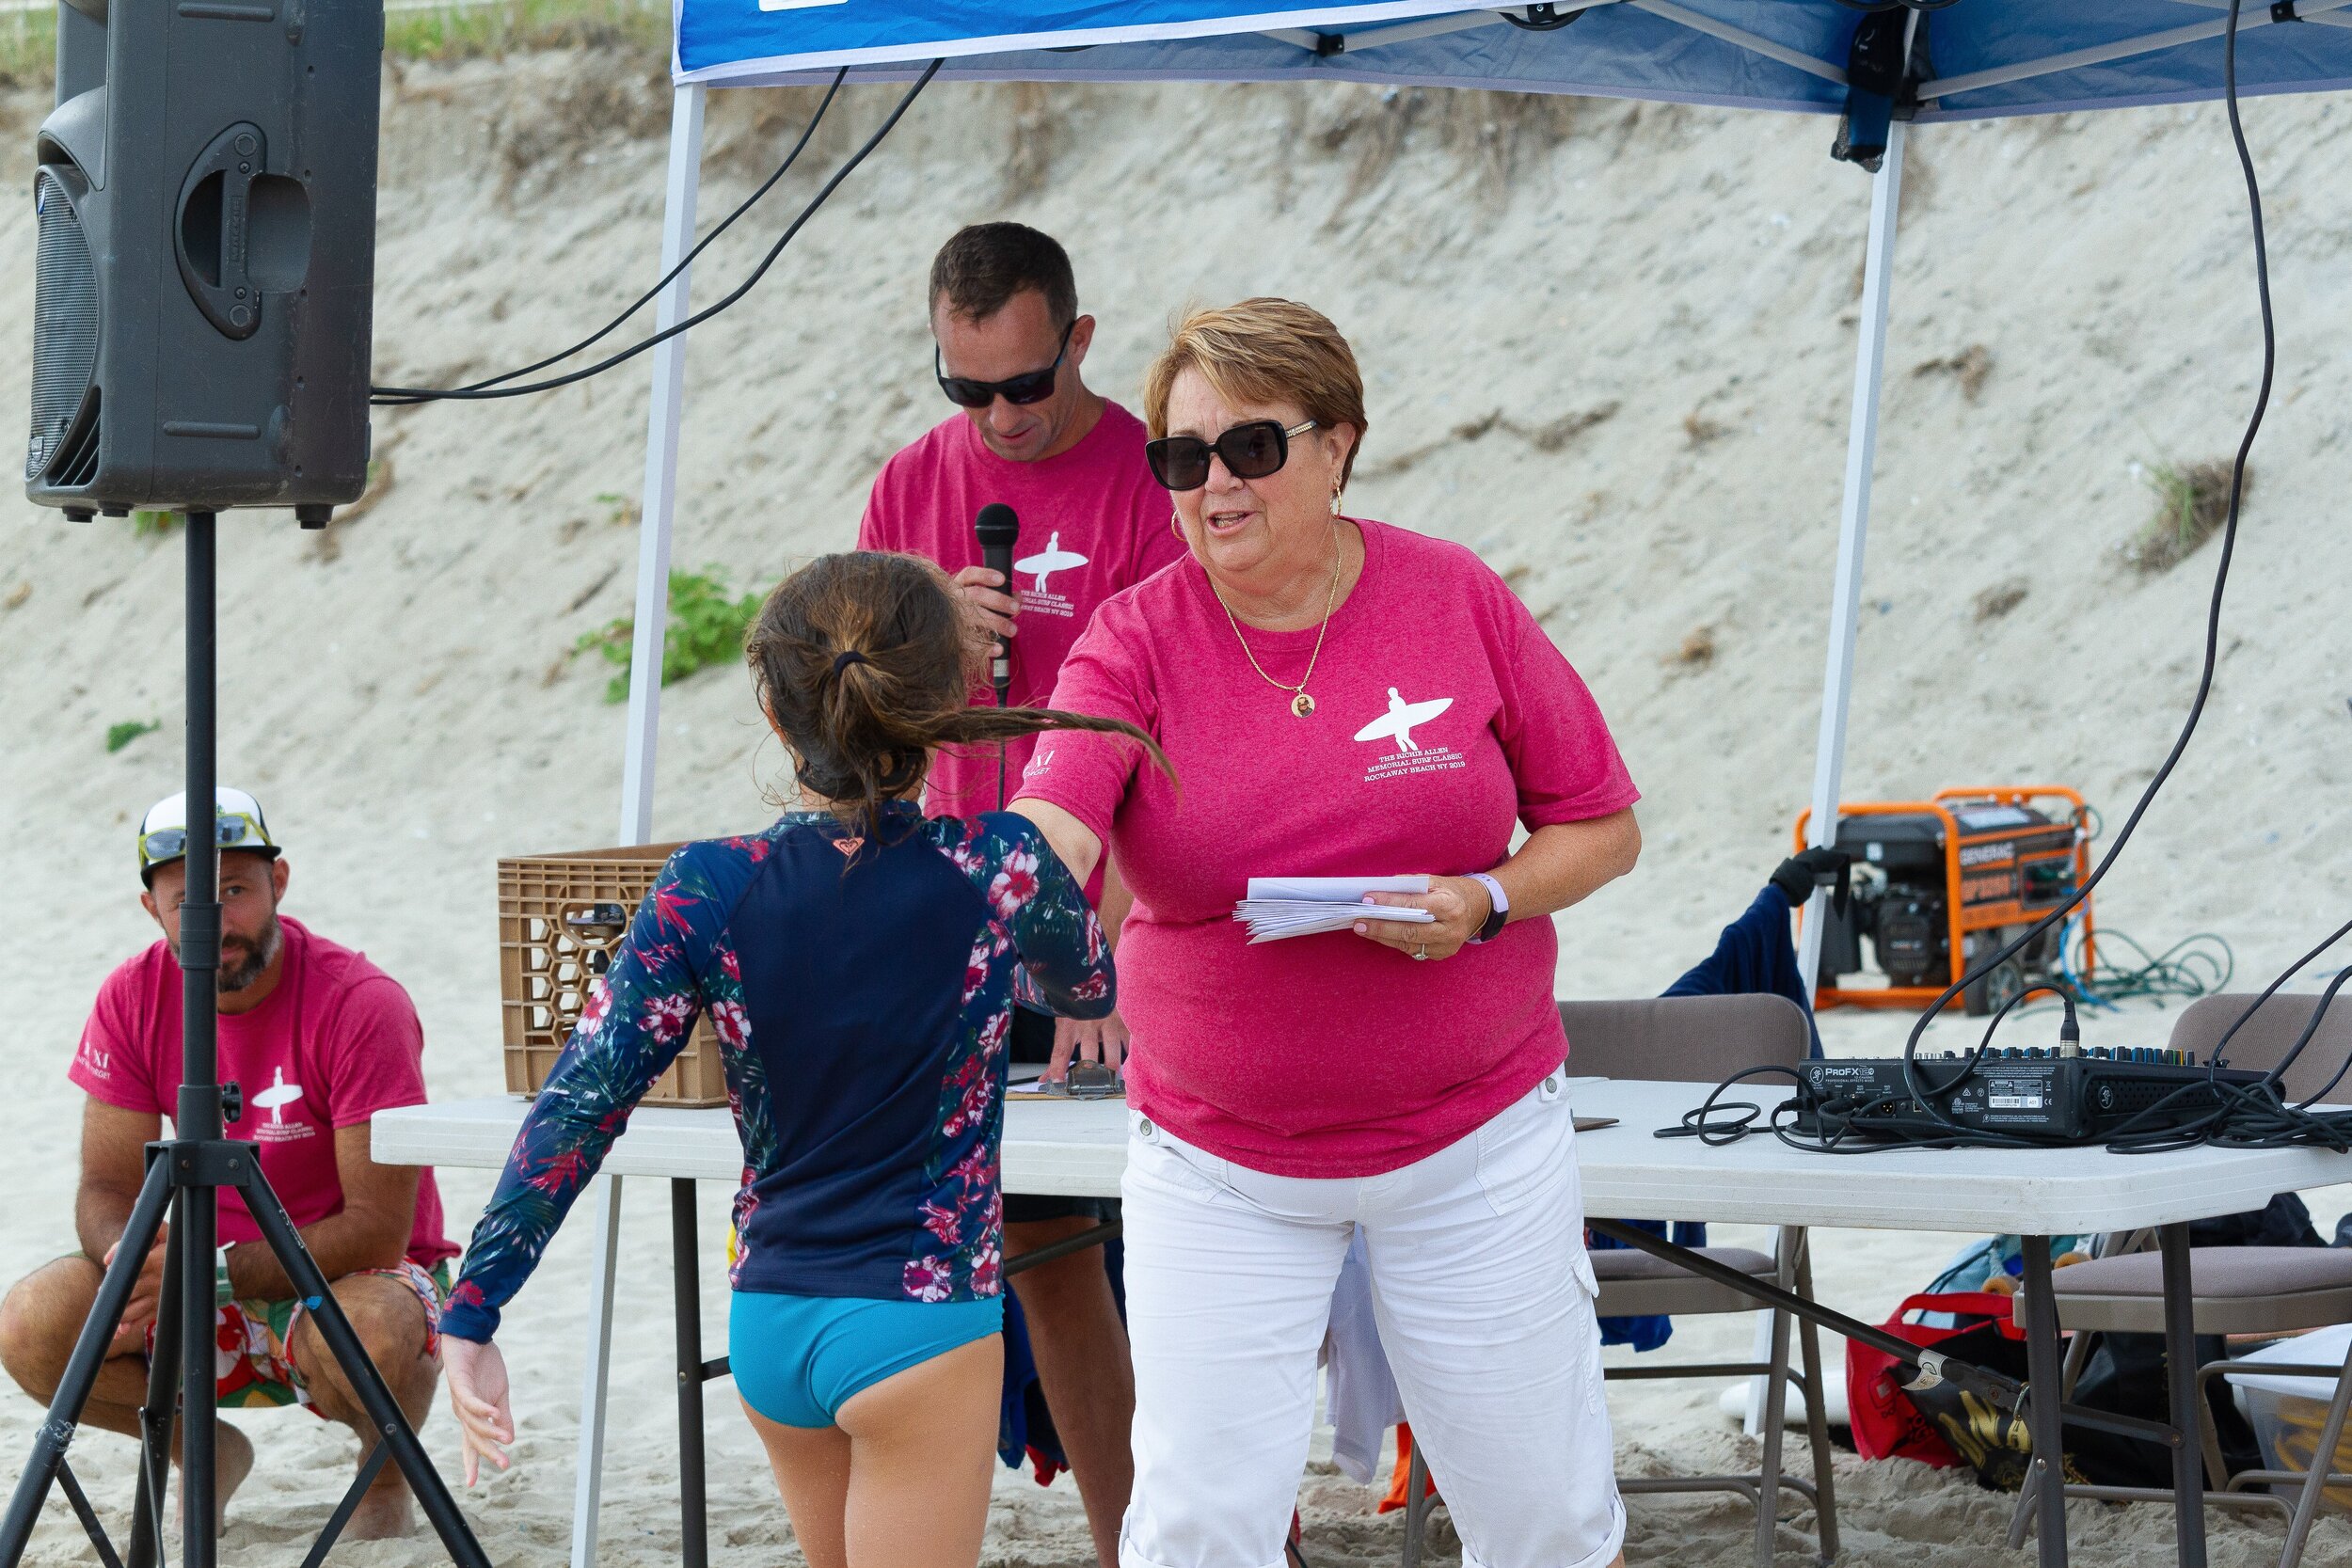   Gail Allen, Richie's mother, hands out cash prizes to the winners of the surf competition.&nbsp;  